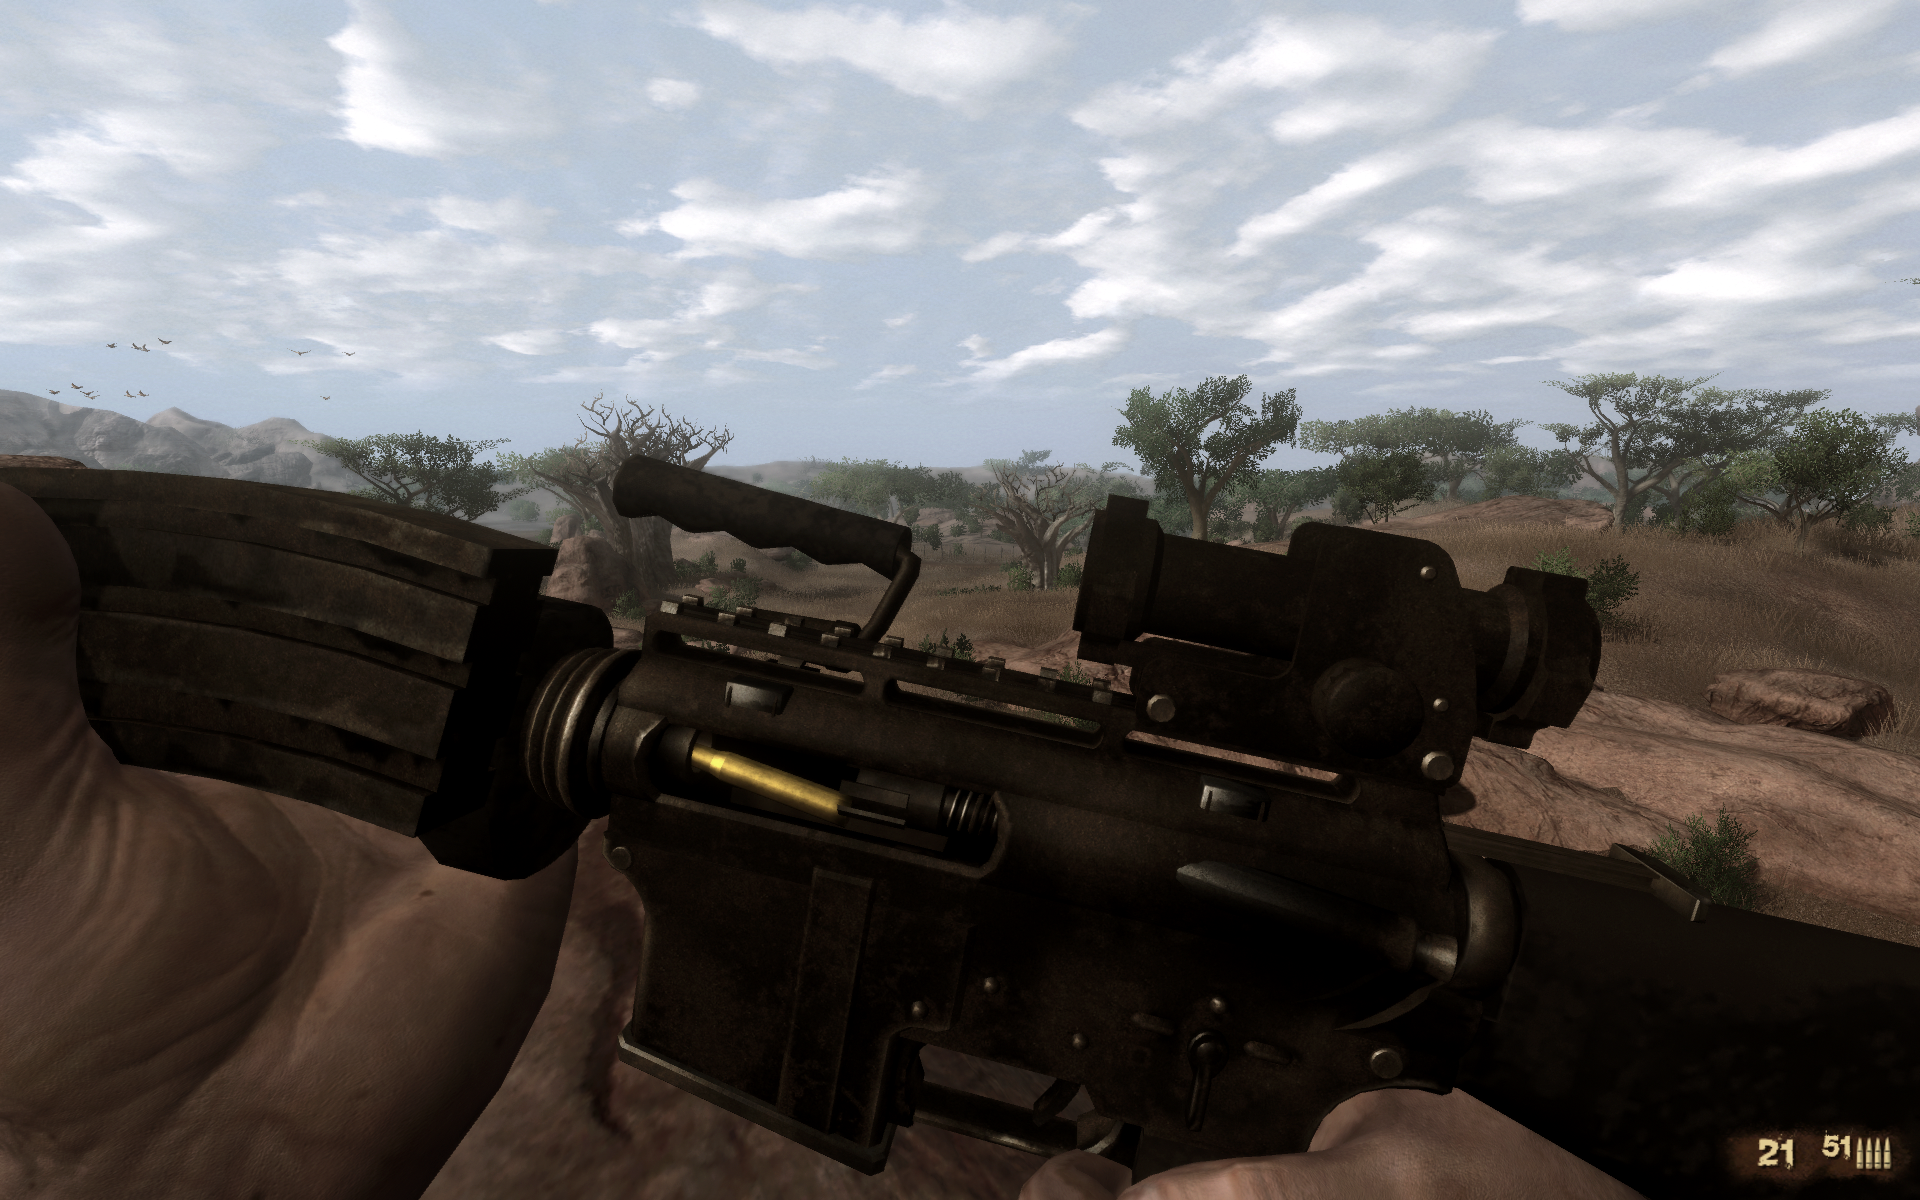 Fixes/Mods for ejection ports on weapons? : r/farcry2